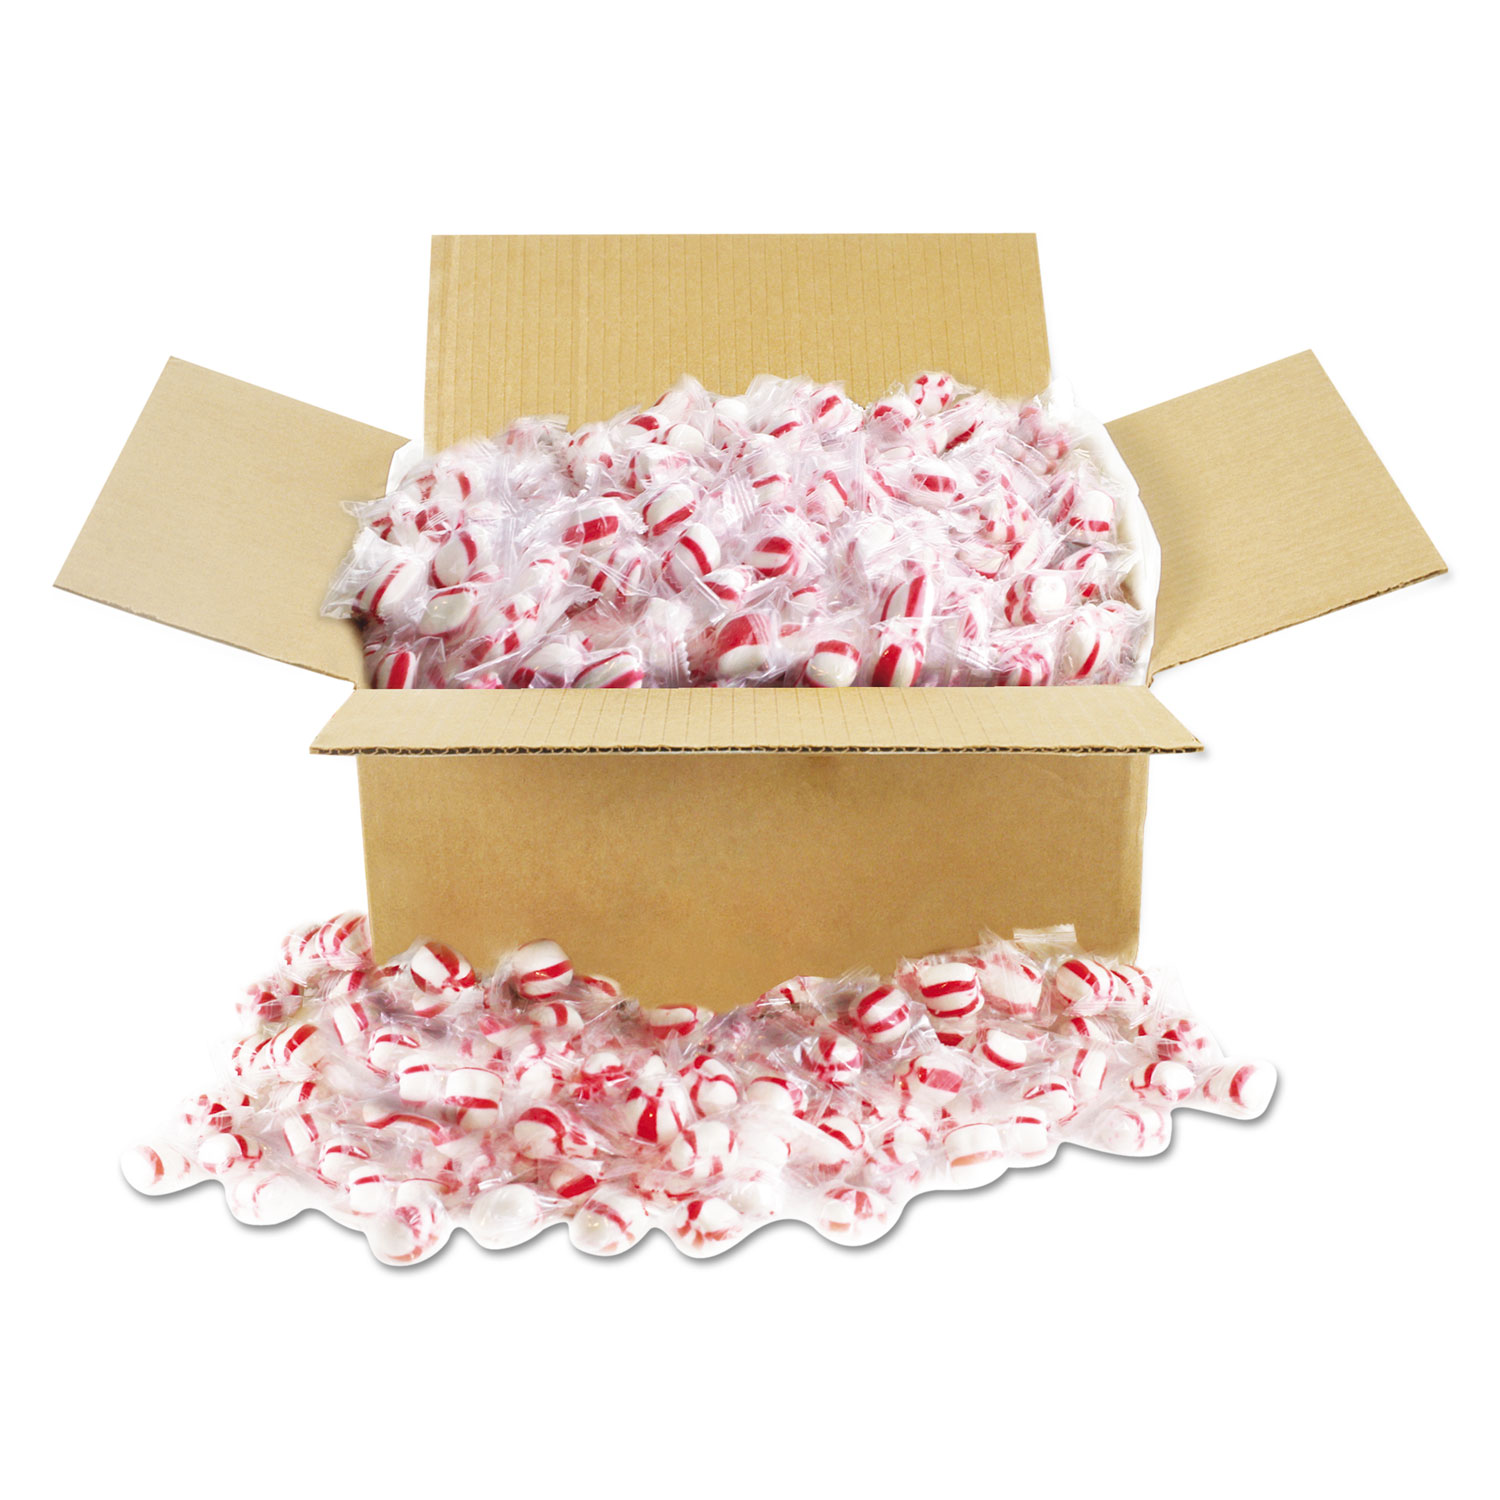  Office Snax 00601 Candy Tubs, Peppermint Puffs, Individually Wrapped, 10 lb Value Size Box (OFX00601) 